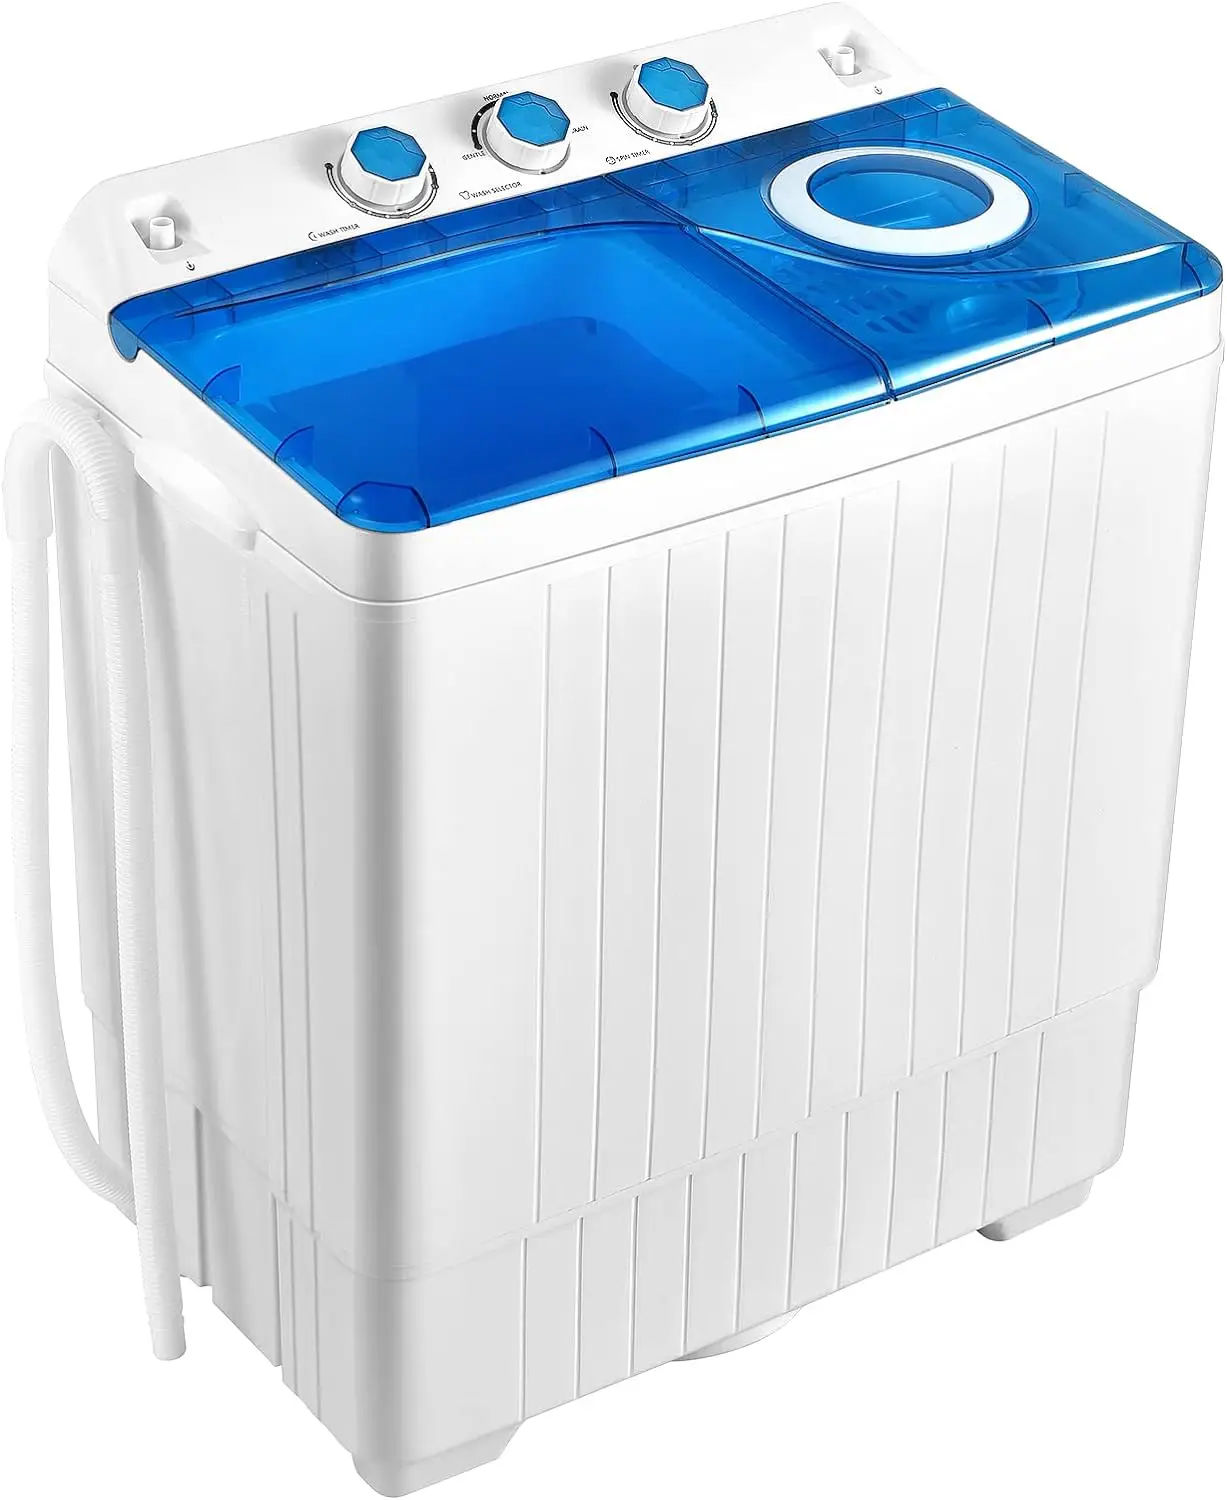  portable washing machine 2 in 1 washer and spinner combo 26lbs capacity 18 lbs washing thumb200